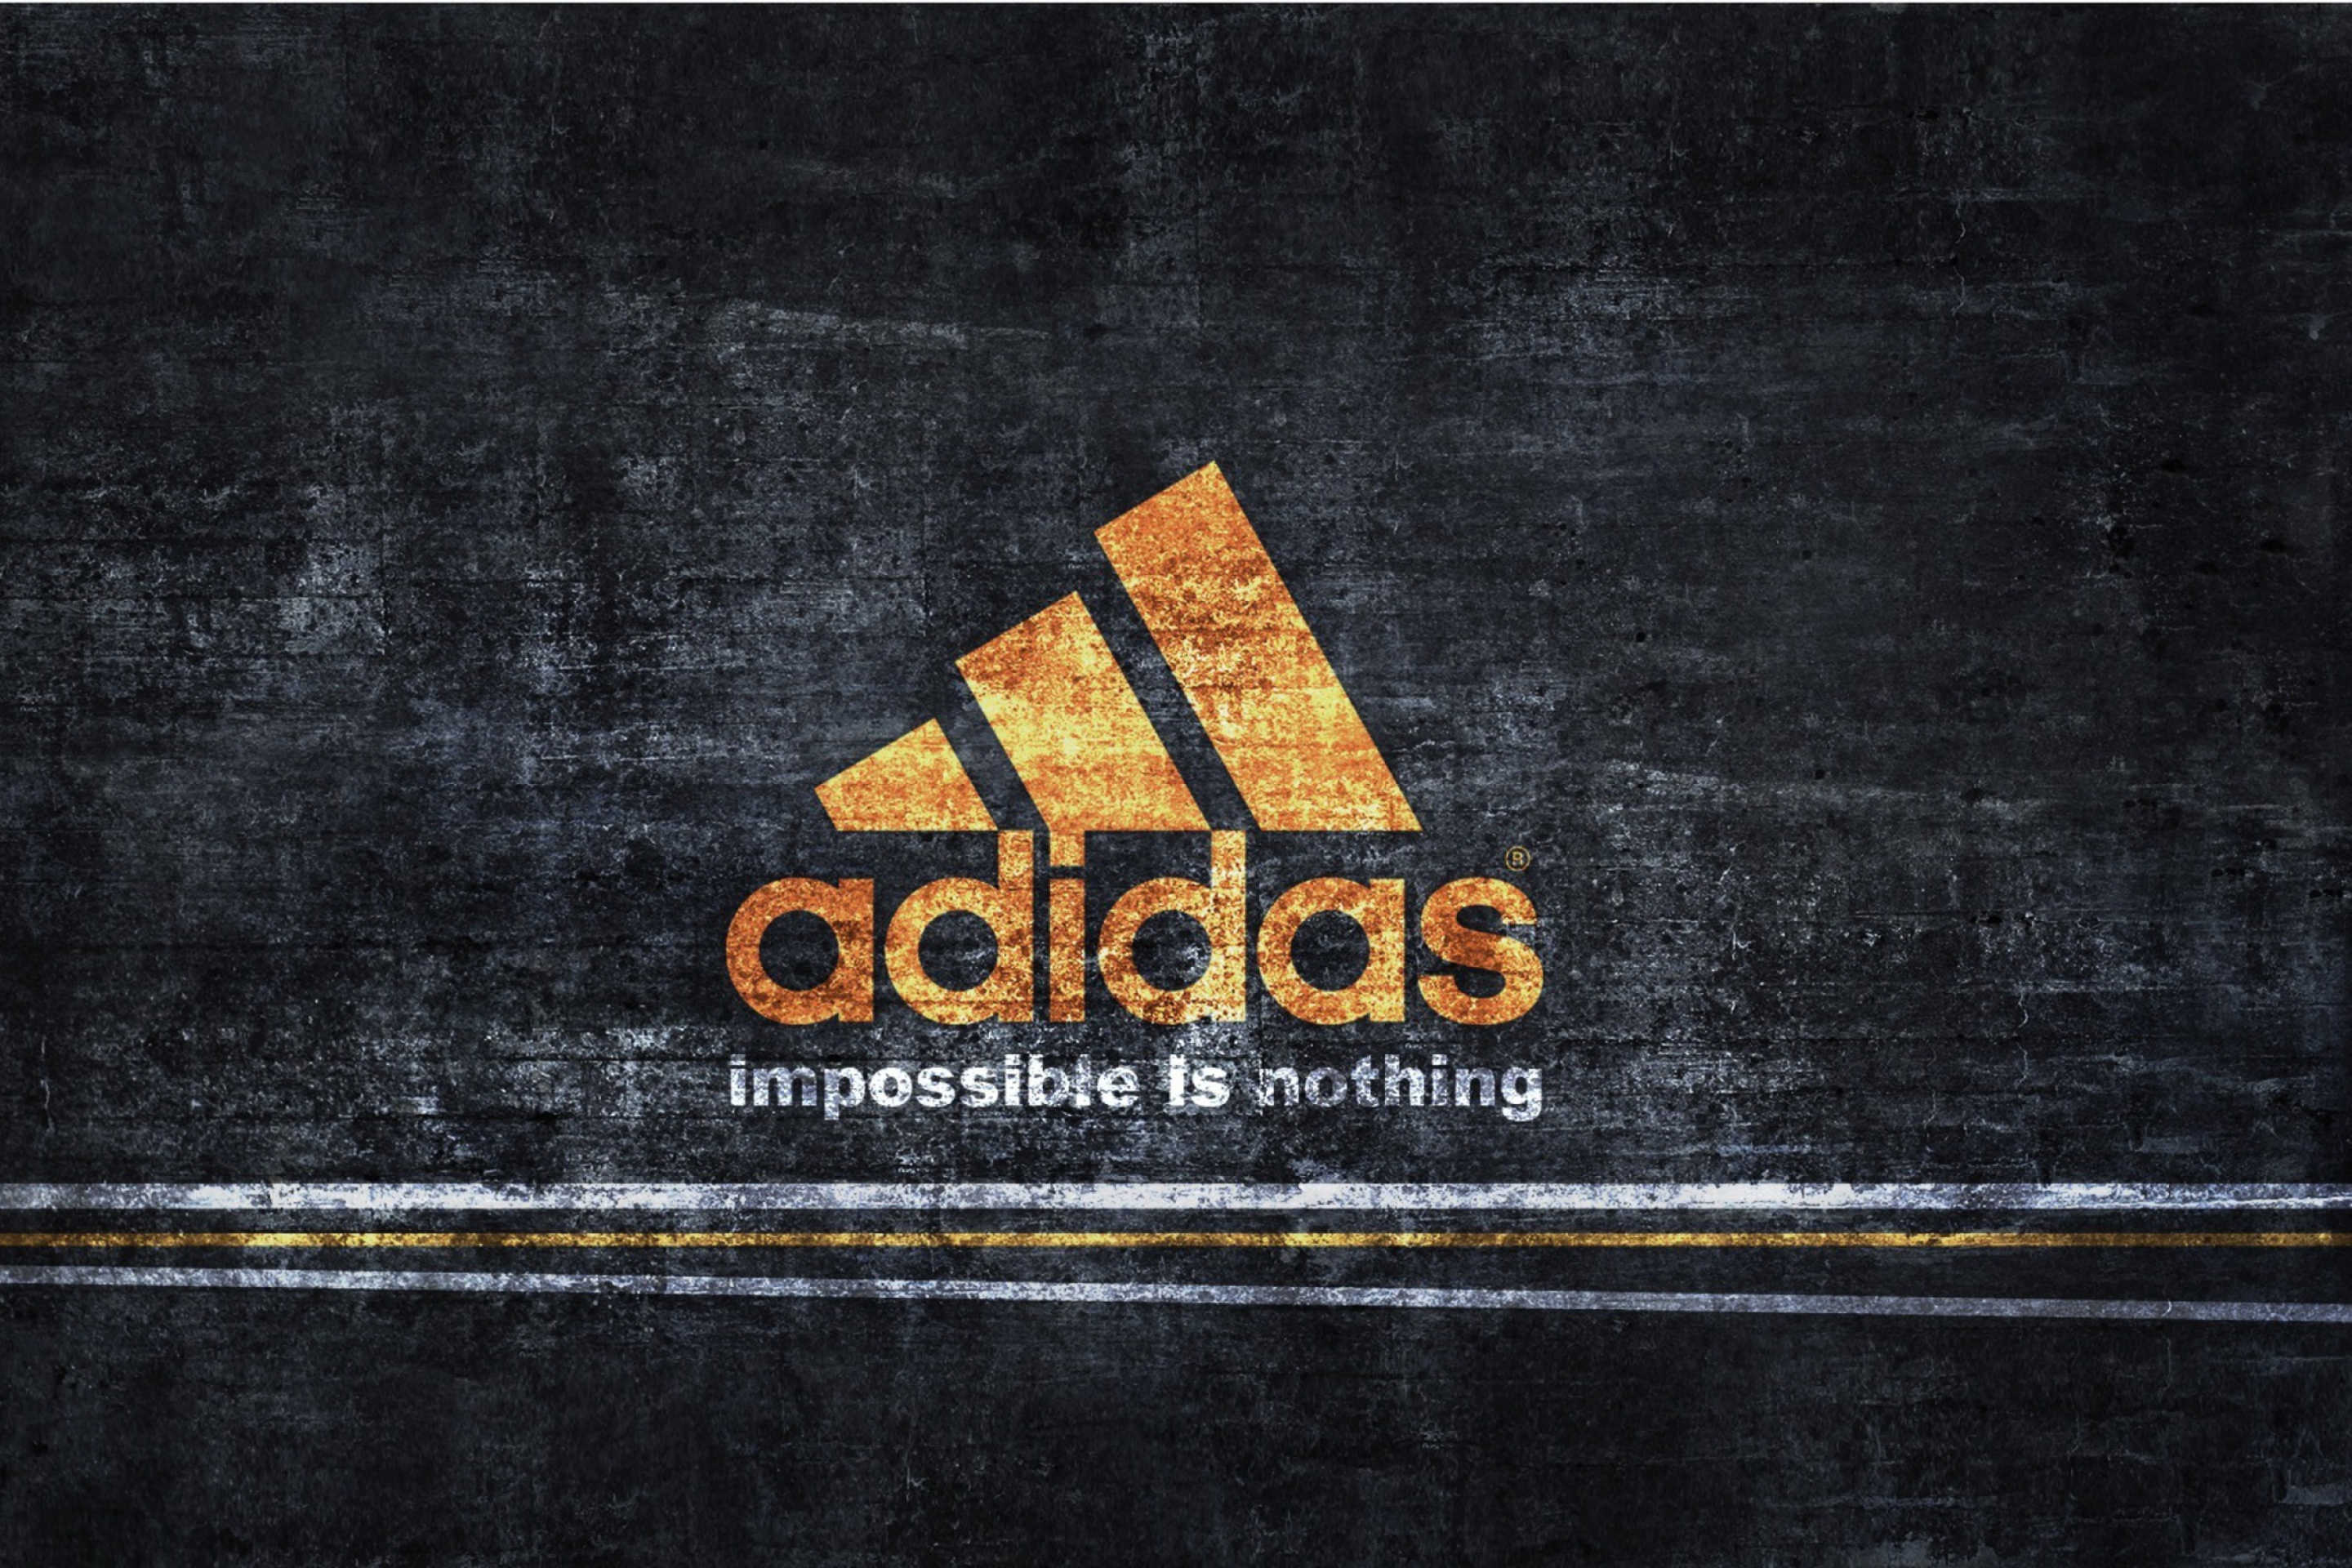 Adidas – Impossible is Nothing screenshot #1 2880x1920